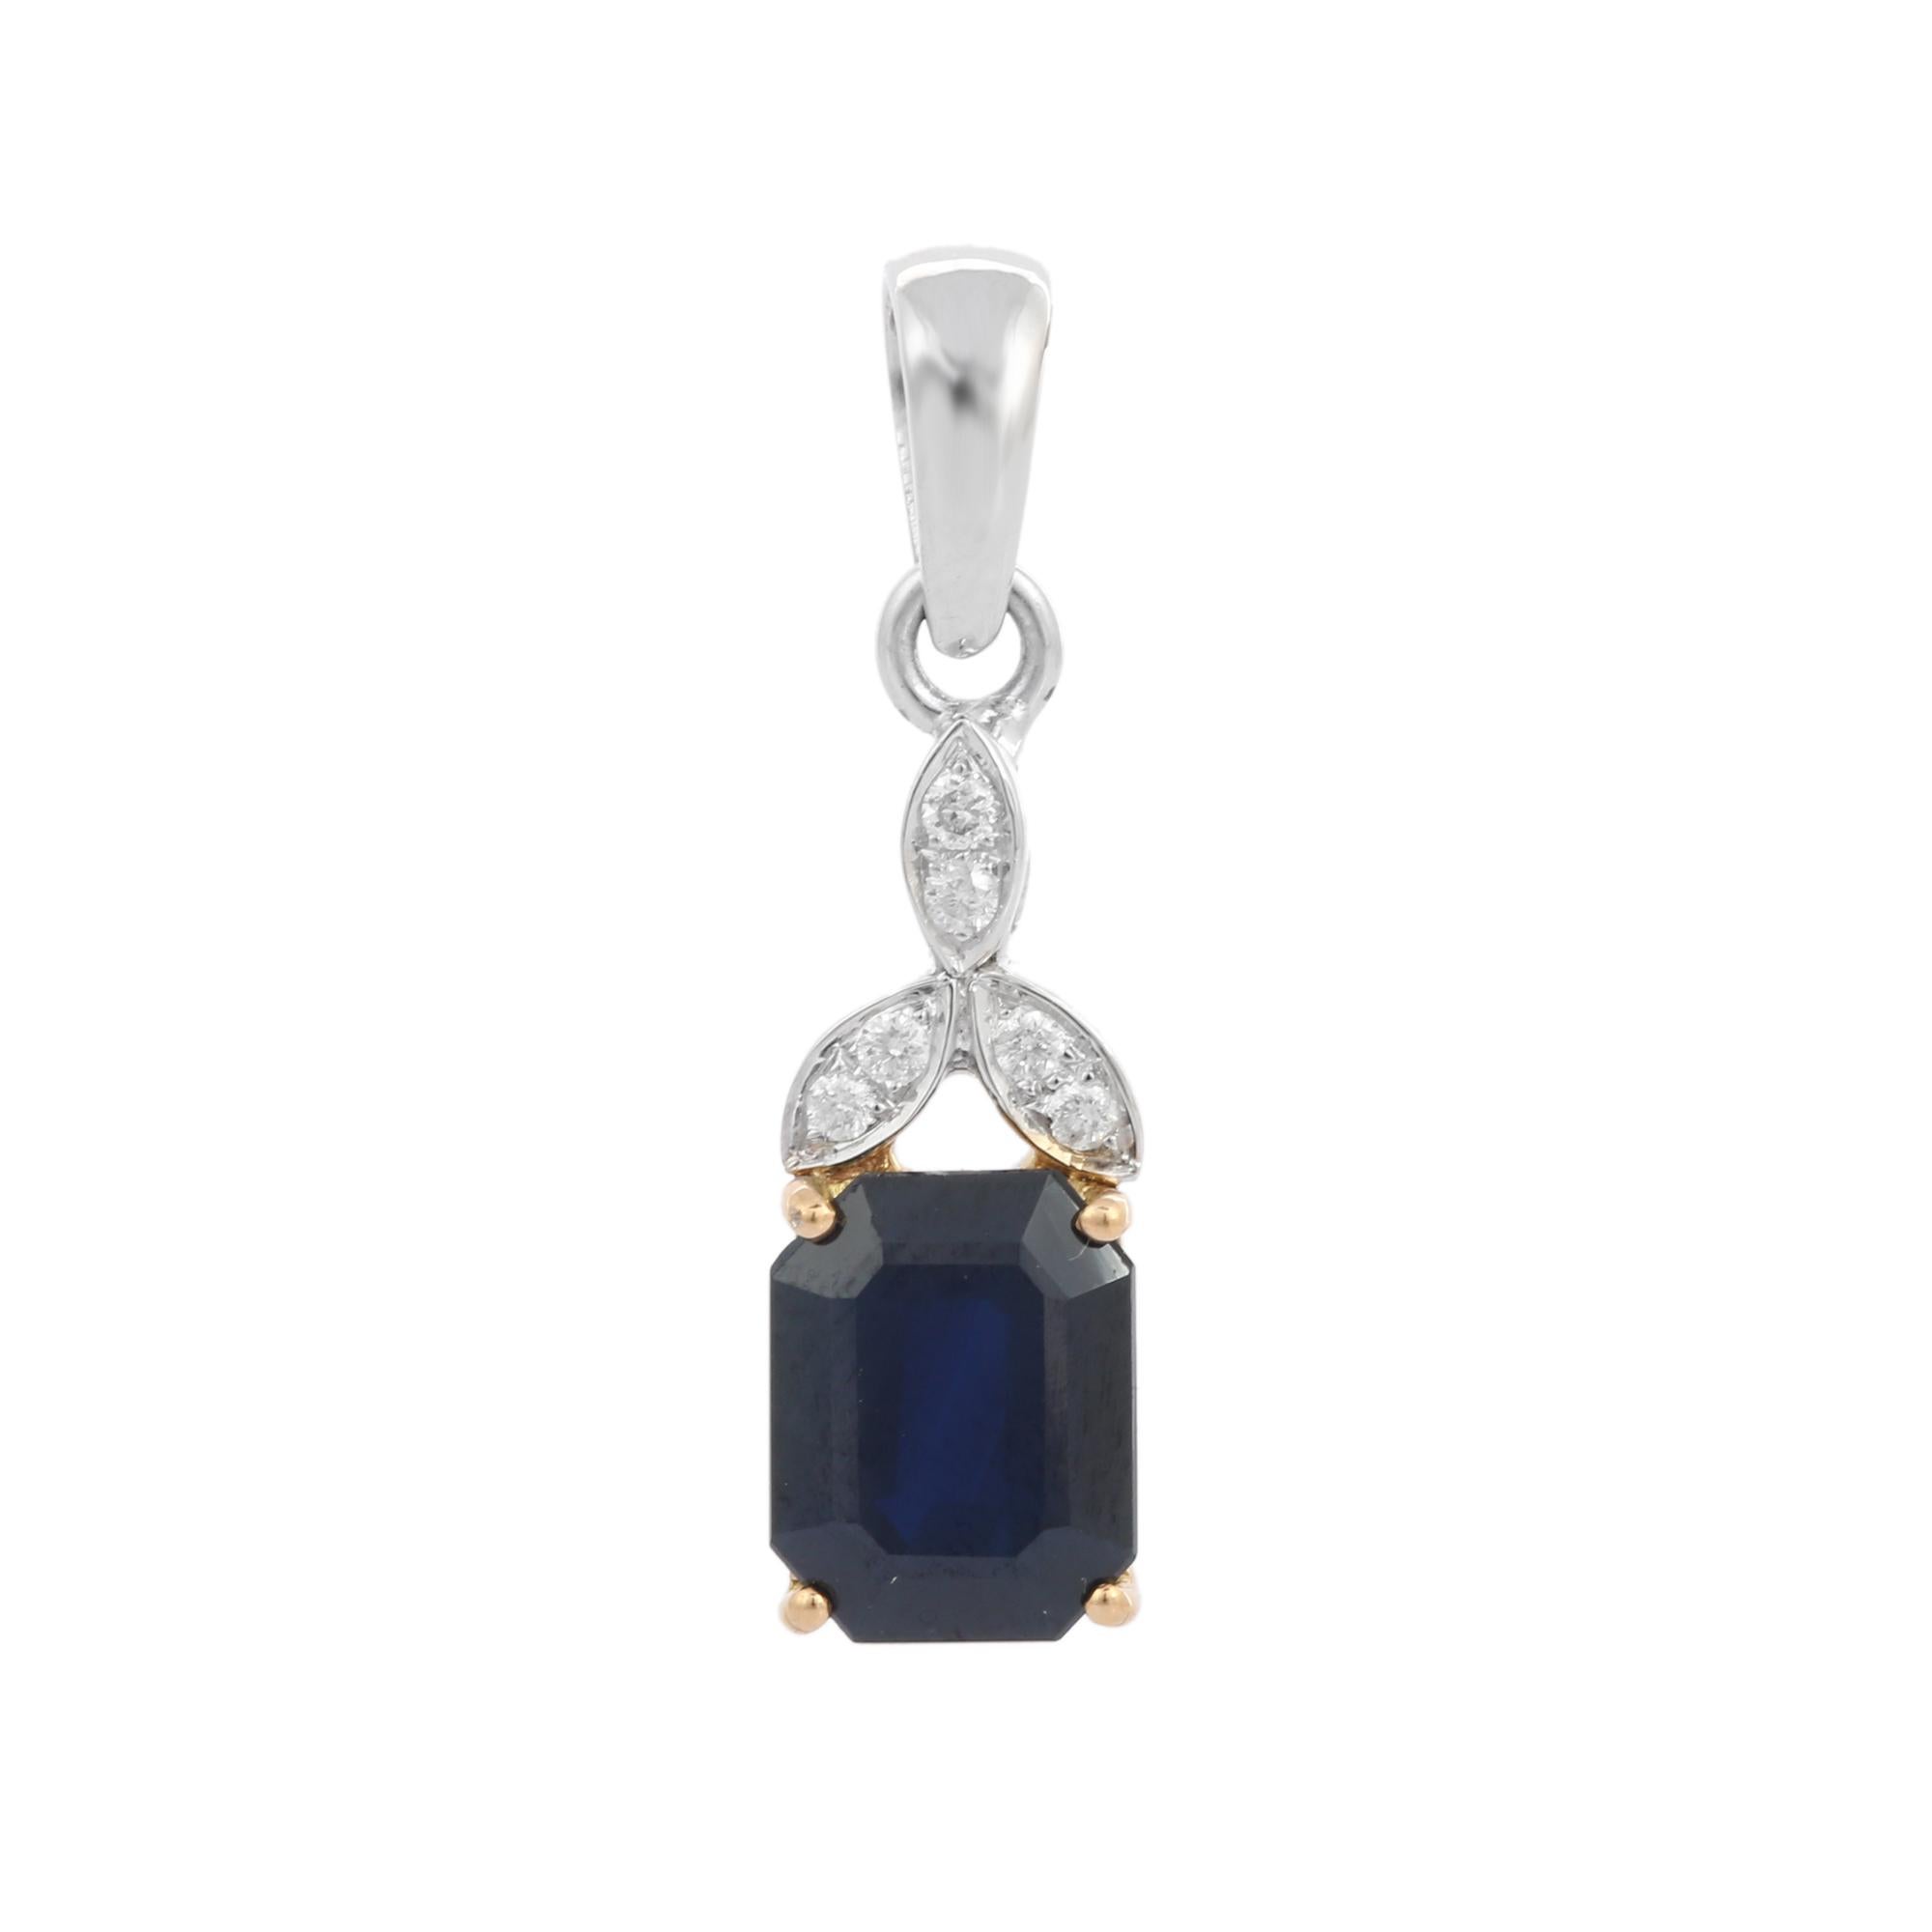 Natural Blue Sapphire and Diamond pendant in 18K Gold. It has octagon cut sapphire studded with diamond that completes your look with a decent touch. Pendants are used to wear or gifted to represent love and promises. It's an attractive jewelry